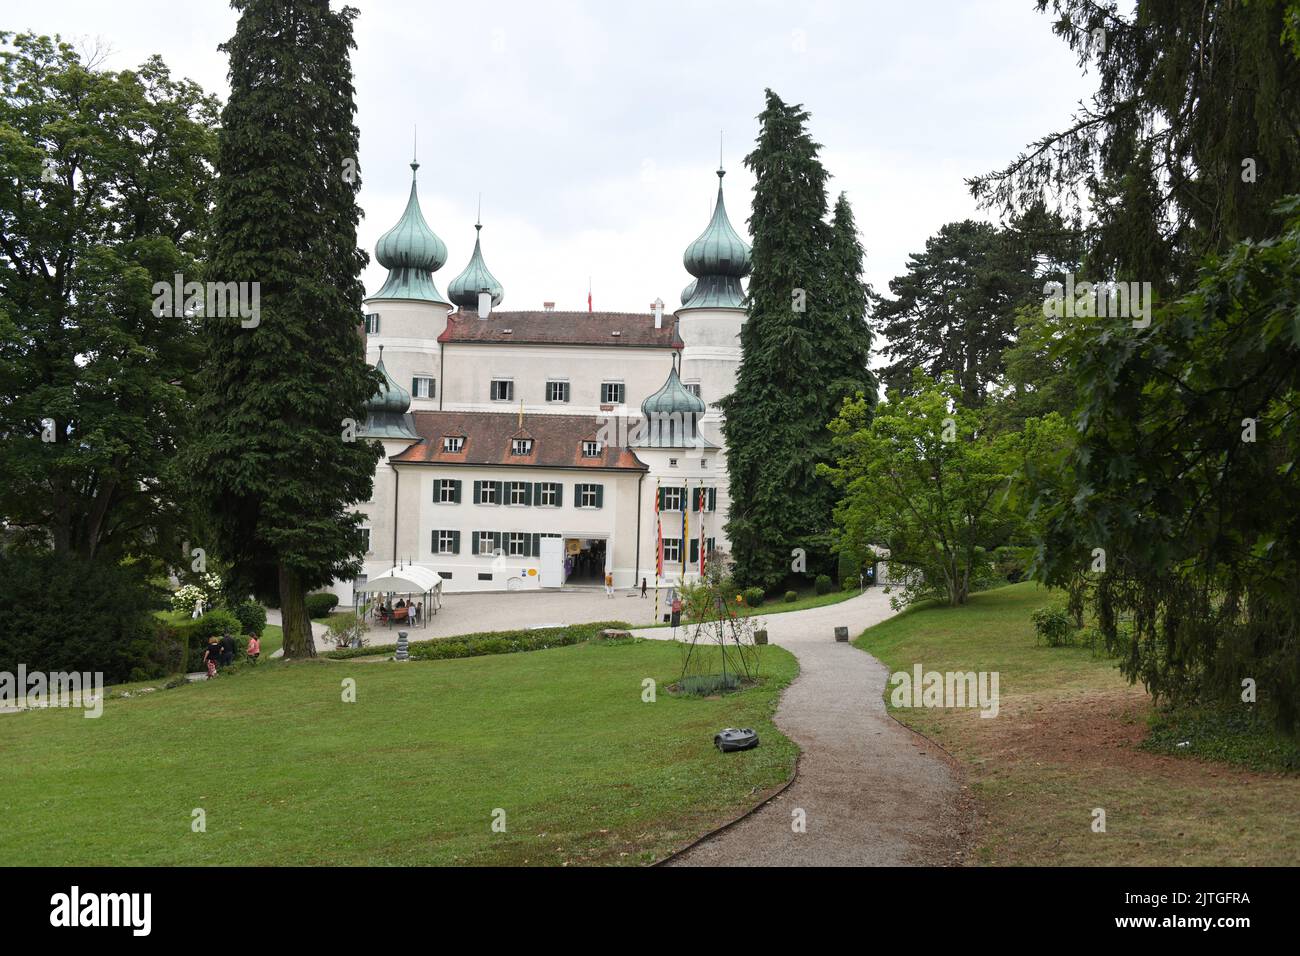 Castle Artstetten in Lower Austria with the tomb of the heir to the throne Franz Ferdinand, who was murdered in Sarajevo. The murder triggered World W Stock Photo